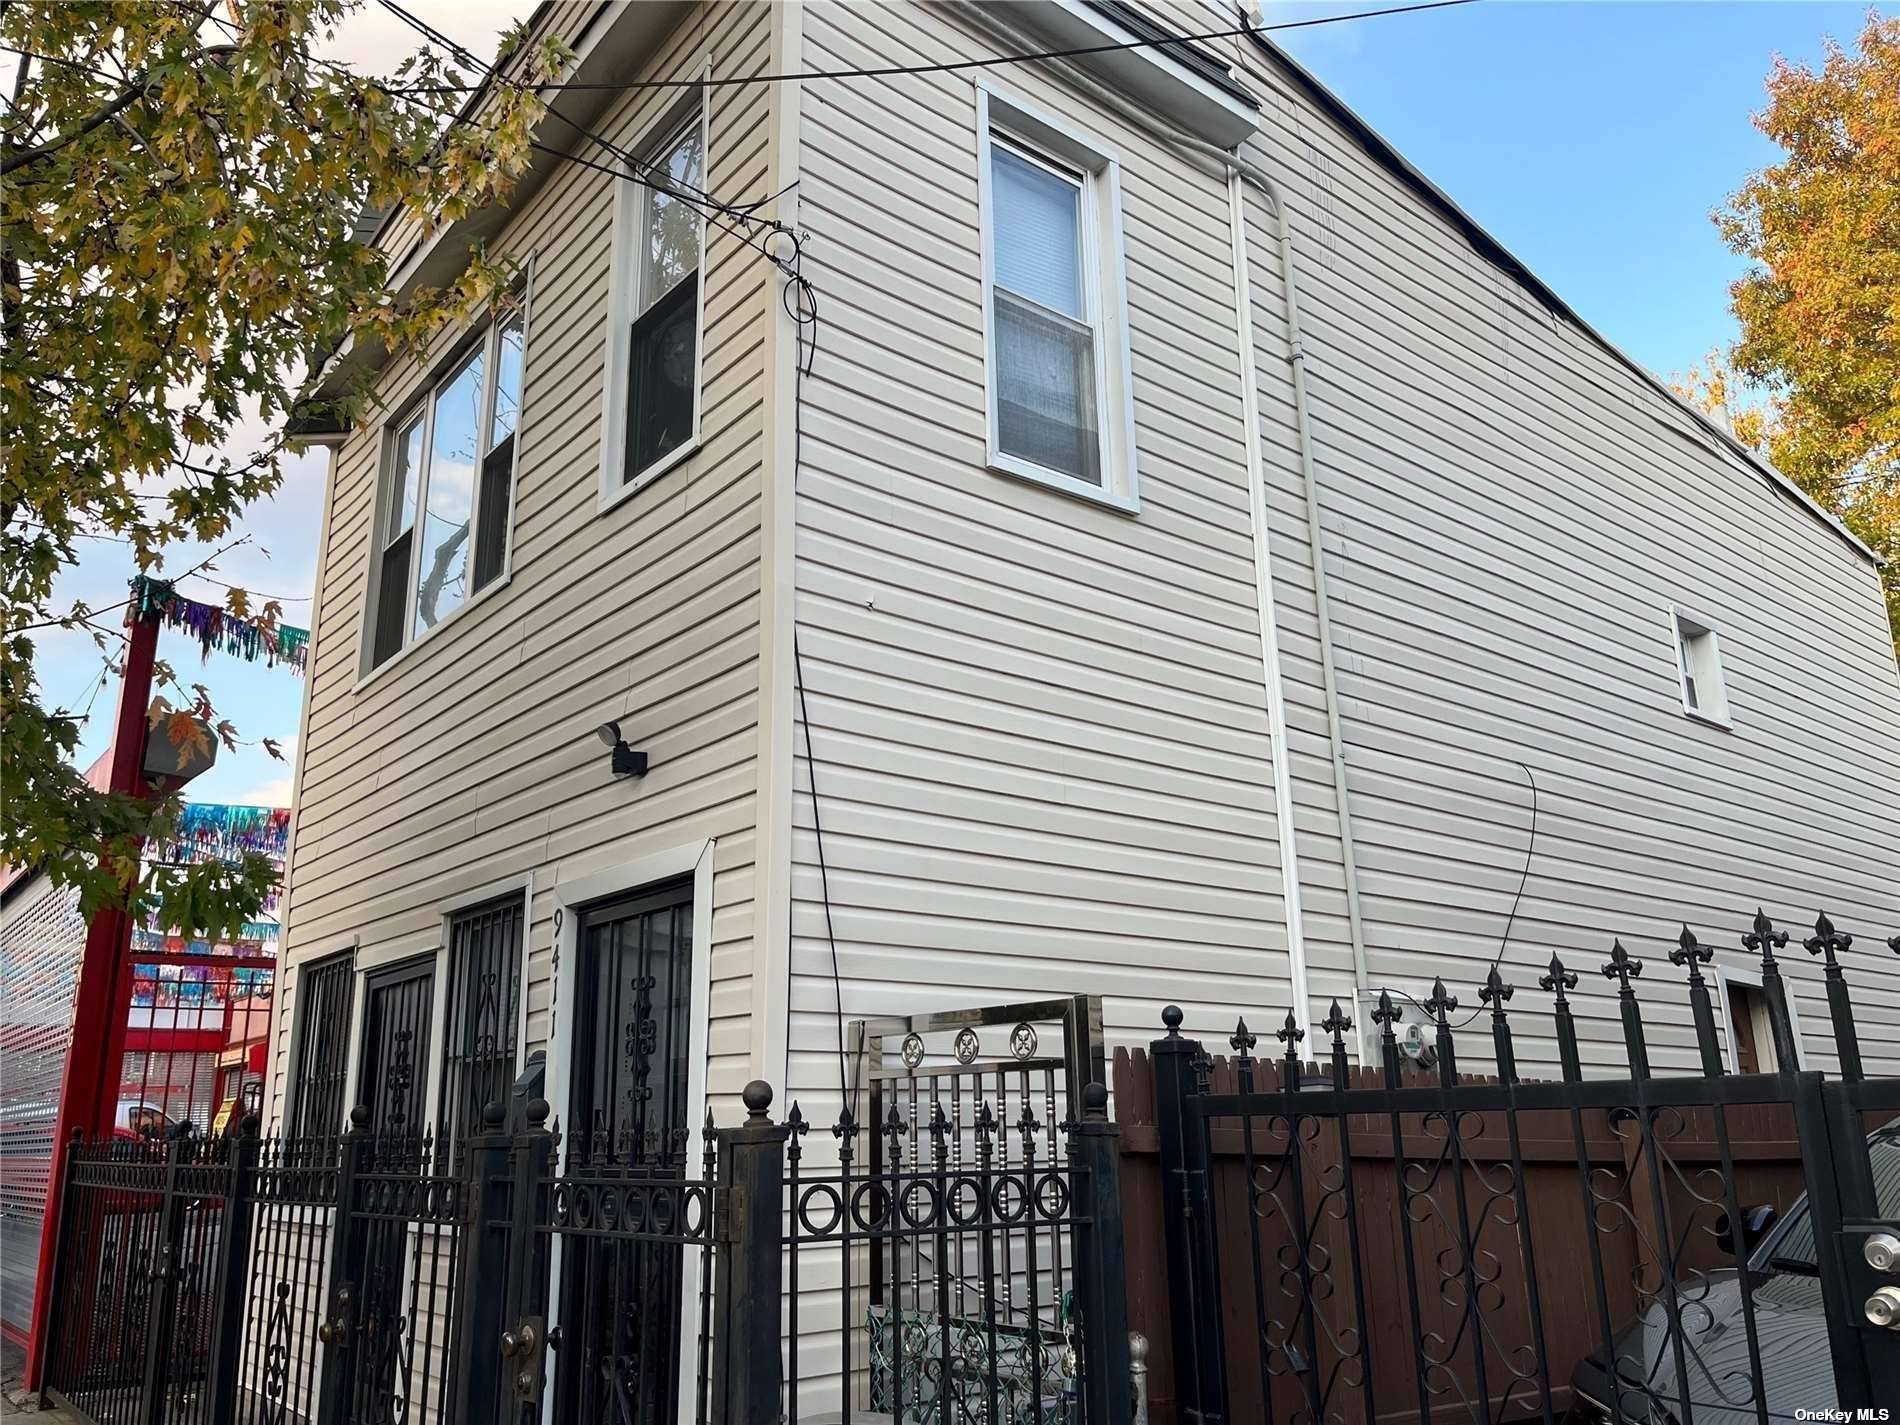 DON'T MISS ! Welcome to this exceptional legal 2 family residence in the heart of Ozone Park a versatile gem.